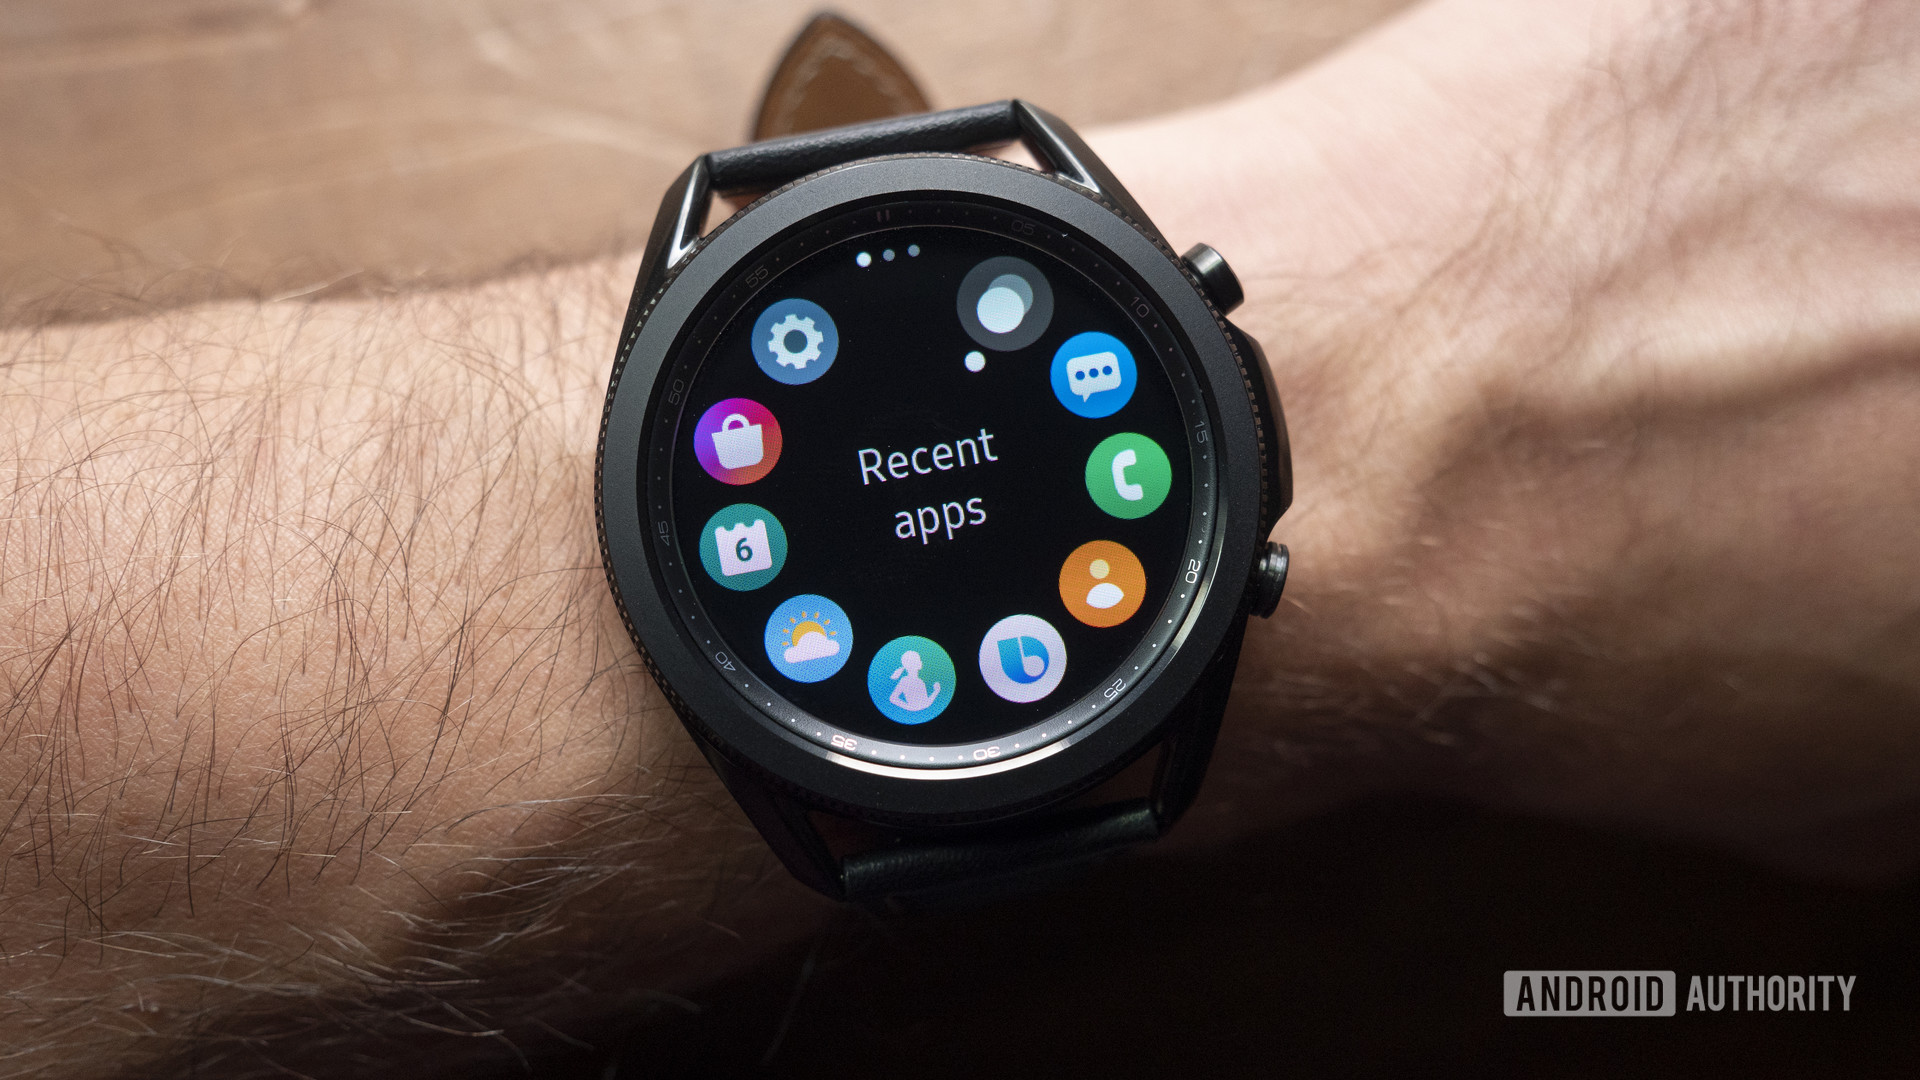 The Samsung Galaxy Watch 3 is still on offer after Prime Day